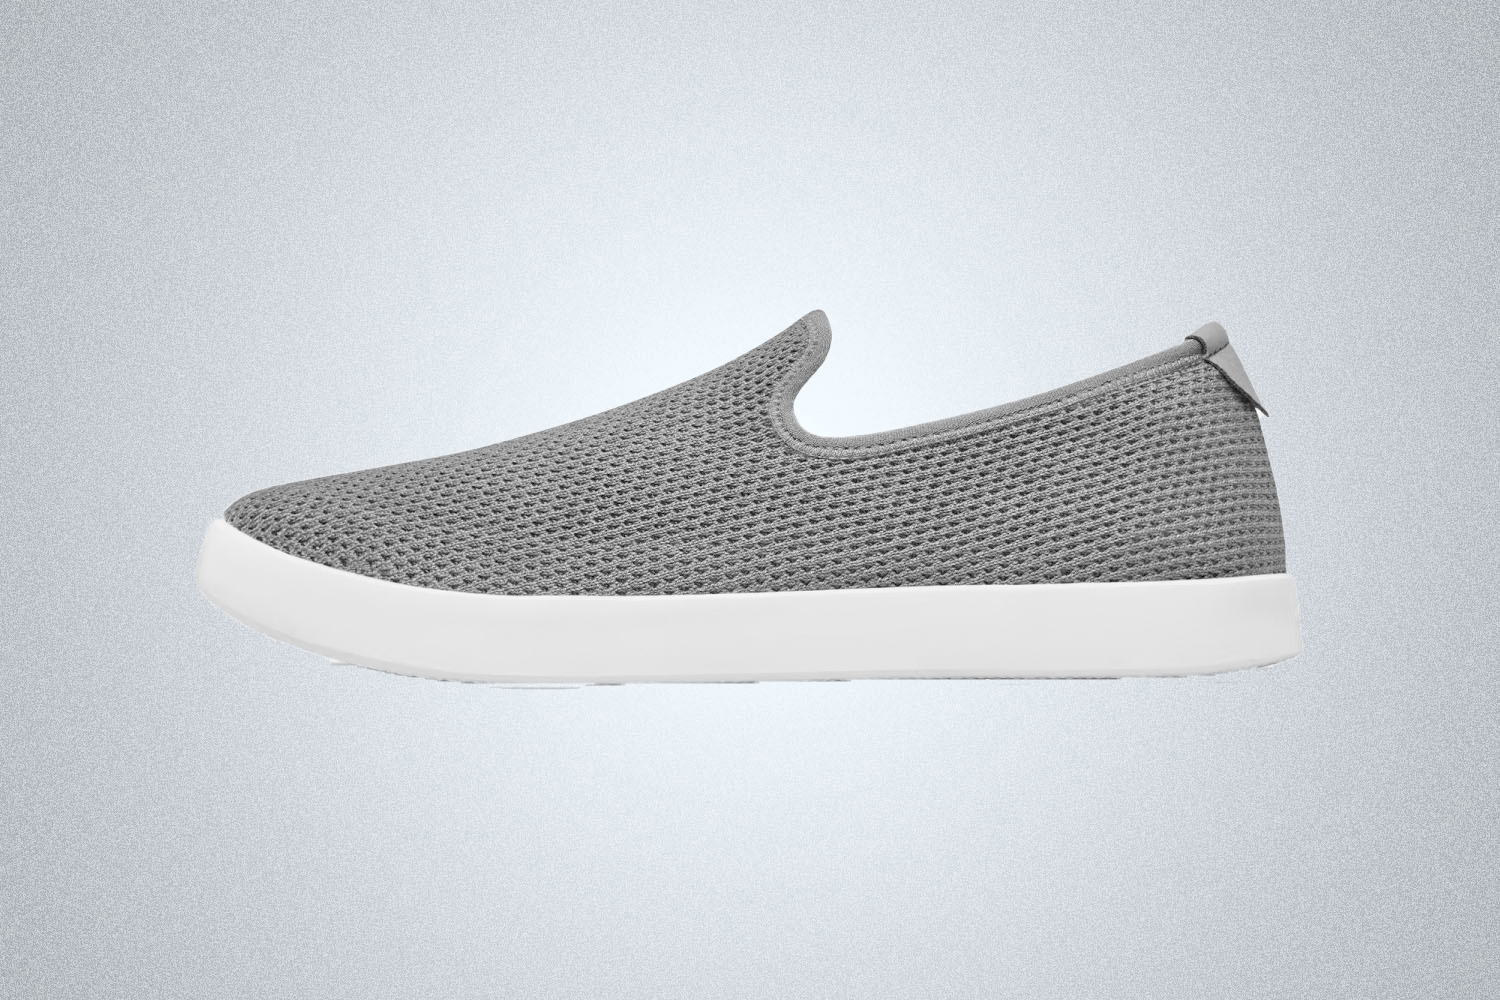 The Allbirds Tree Loungers are one of the best casual shoes to give for Father's Day for less than $100 in 2022